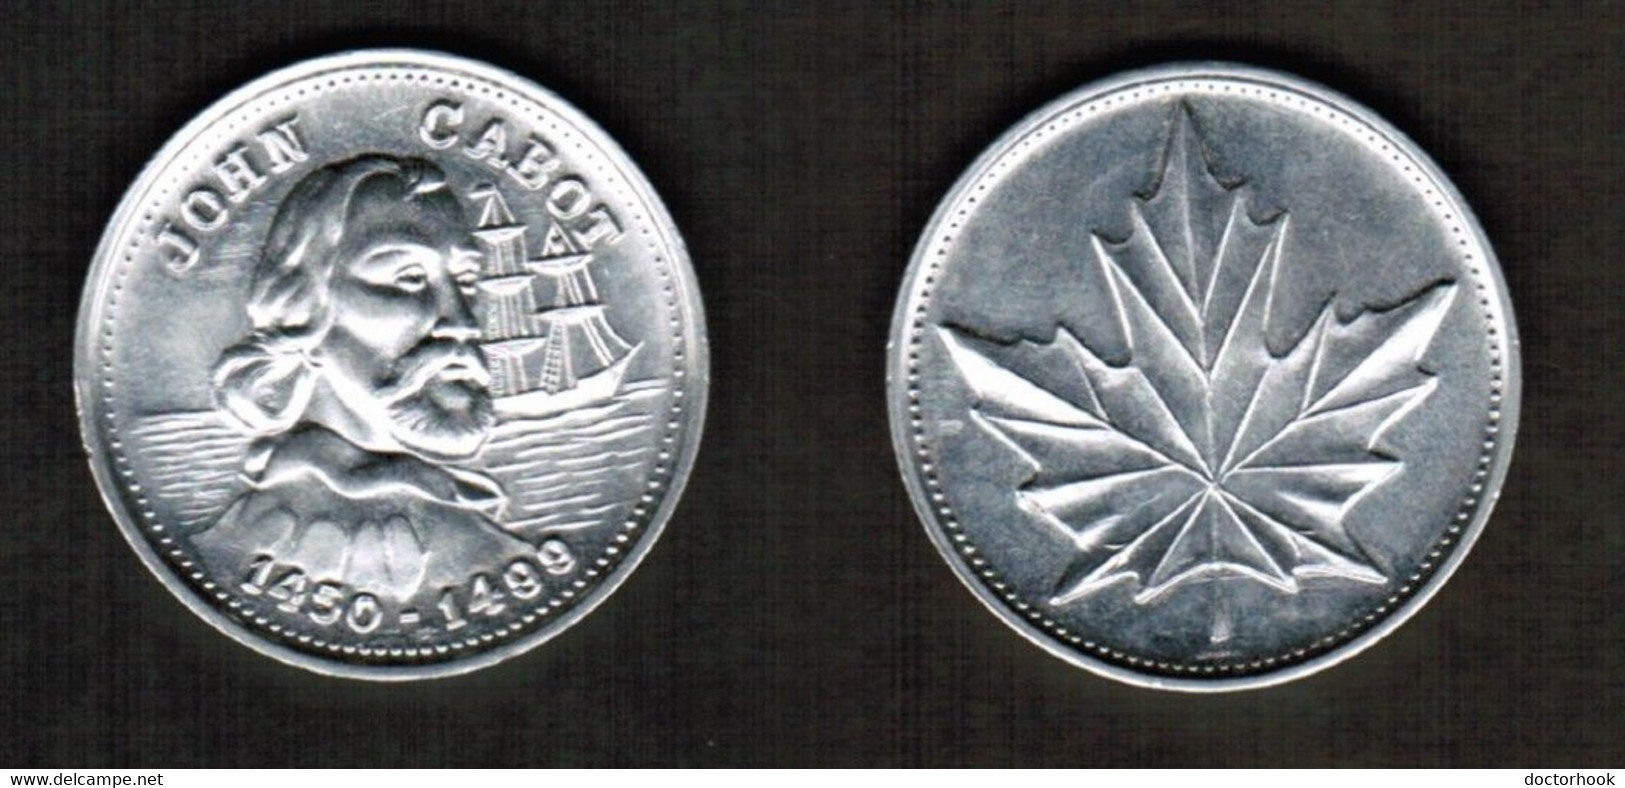 CANADA   MAPLE LEAF "JOHN CABOT" TOKEN N#68896 (CONDITION AS PER SCAN) (T-149) - Professionals / Firms